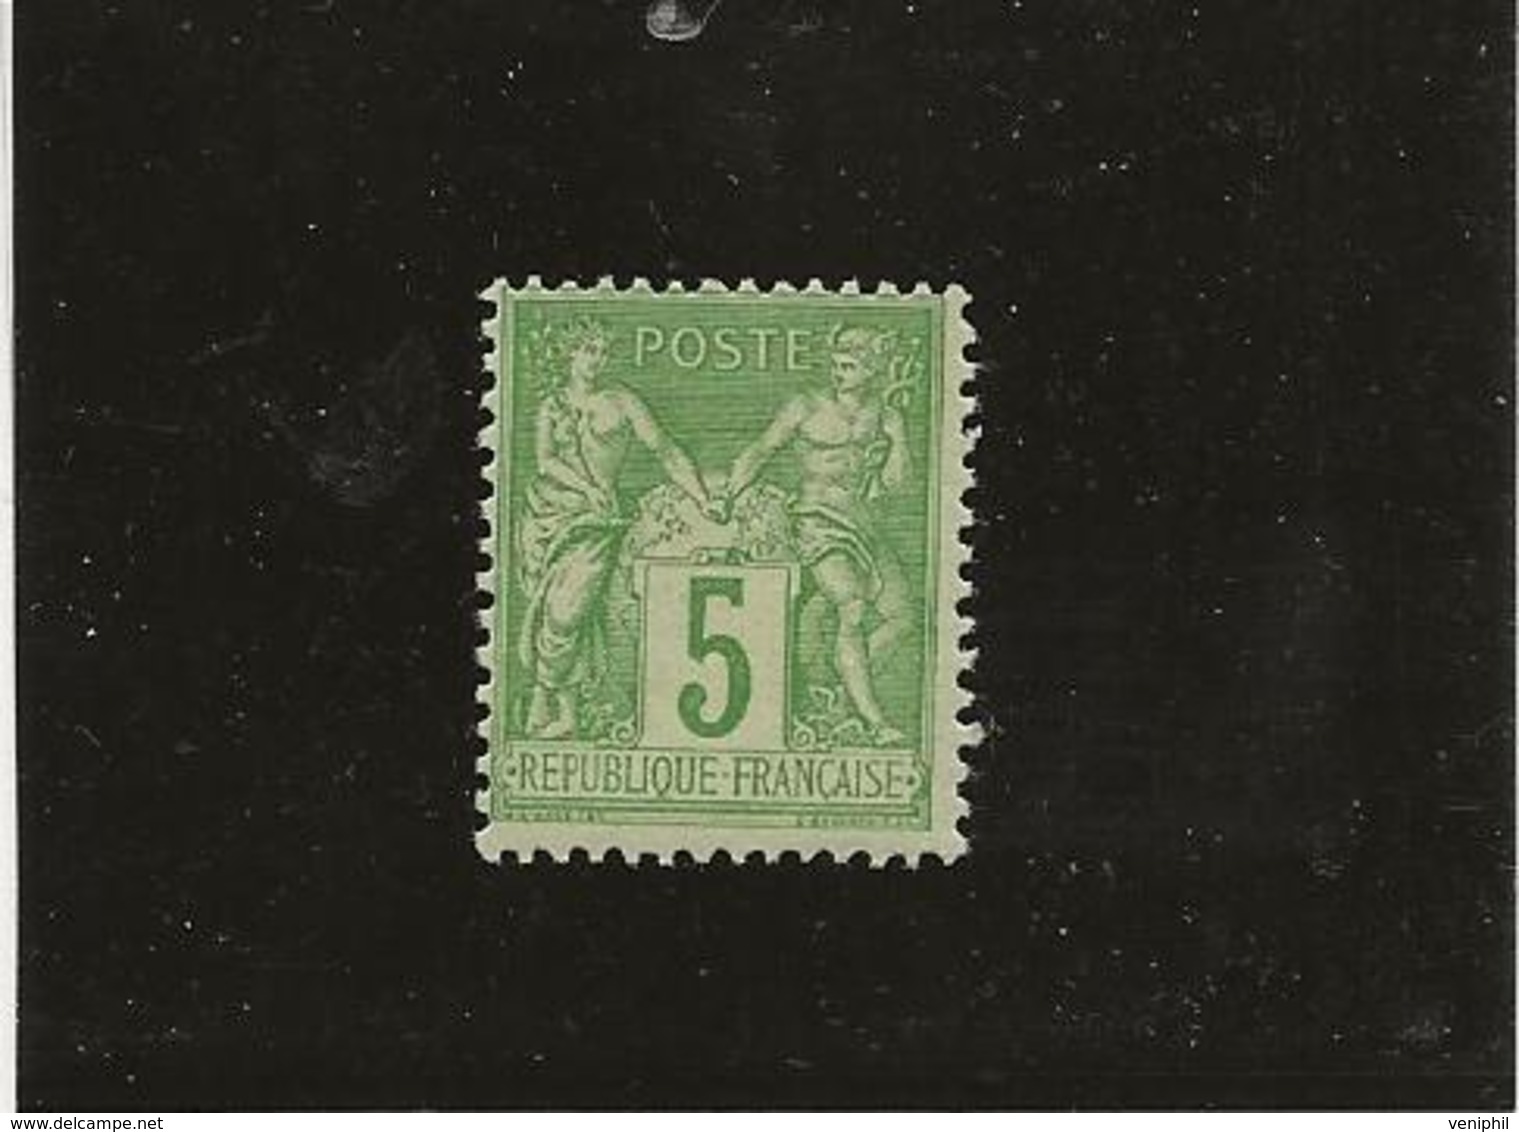 TIMBRE TYPE SAGE N° 106 - NEUF TRES INFIME CHARNIERE - ANNEE 1898 - COTE : 50 € - 1876-1898 Sage (Type II)